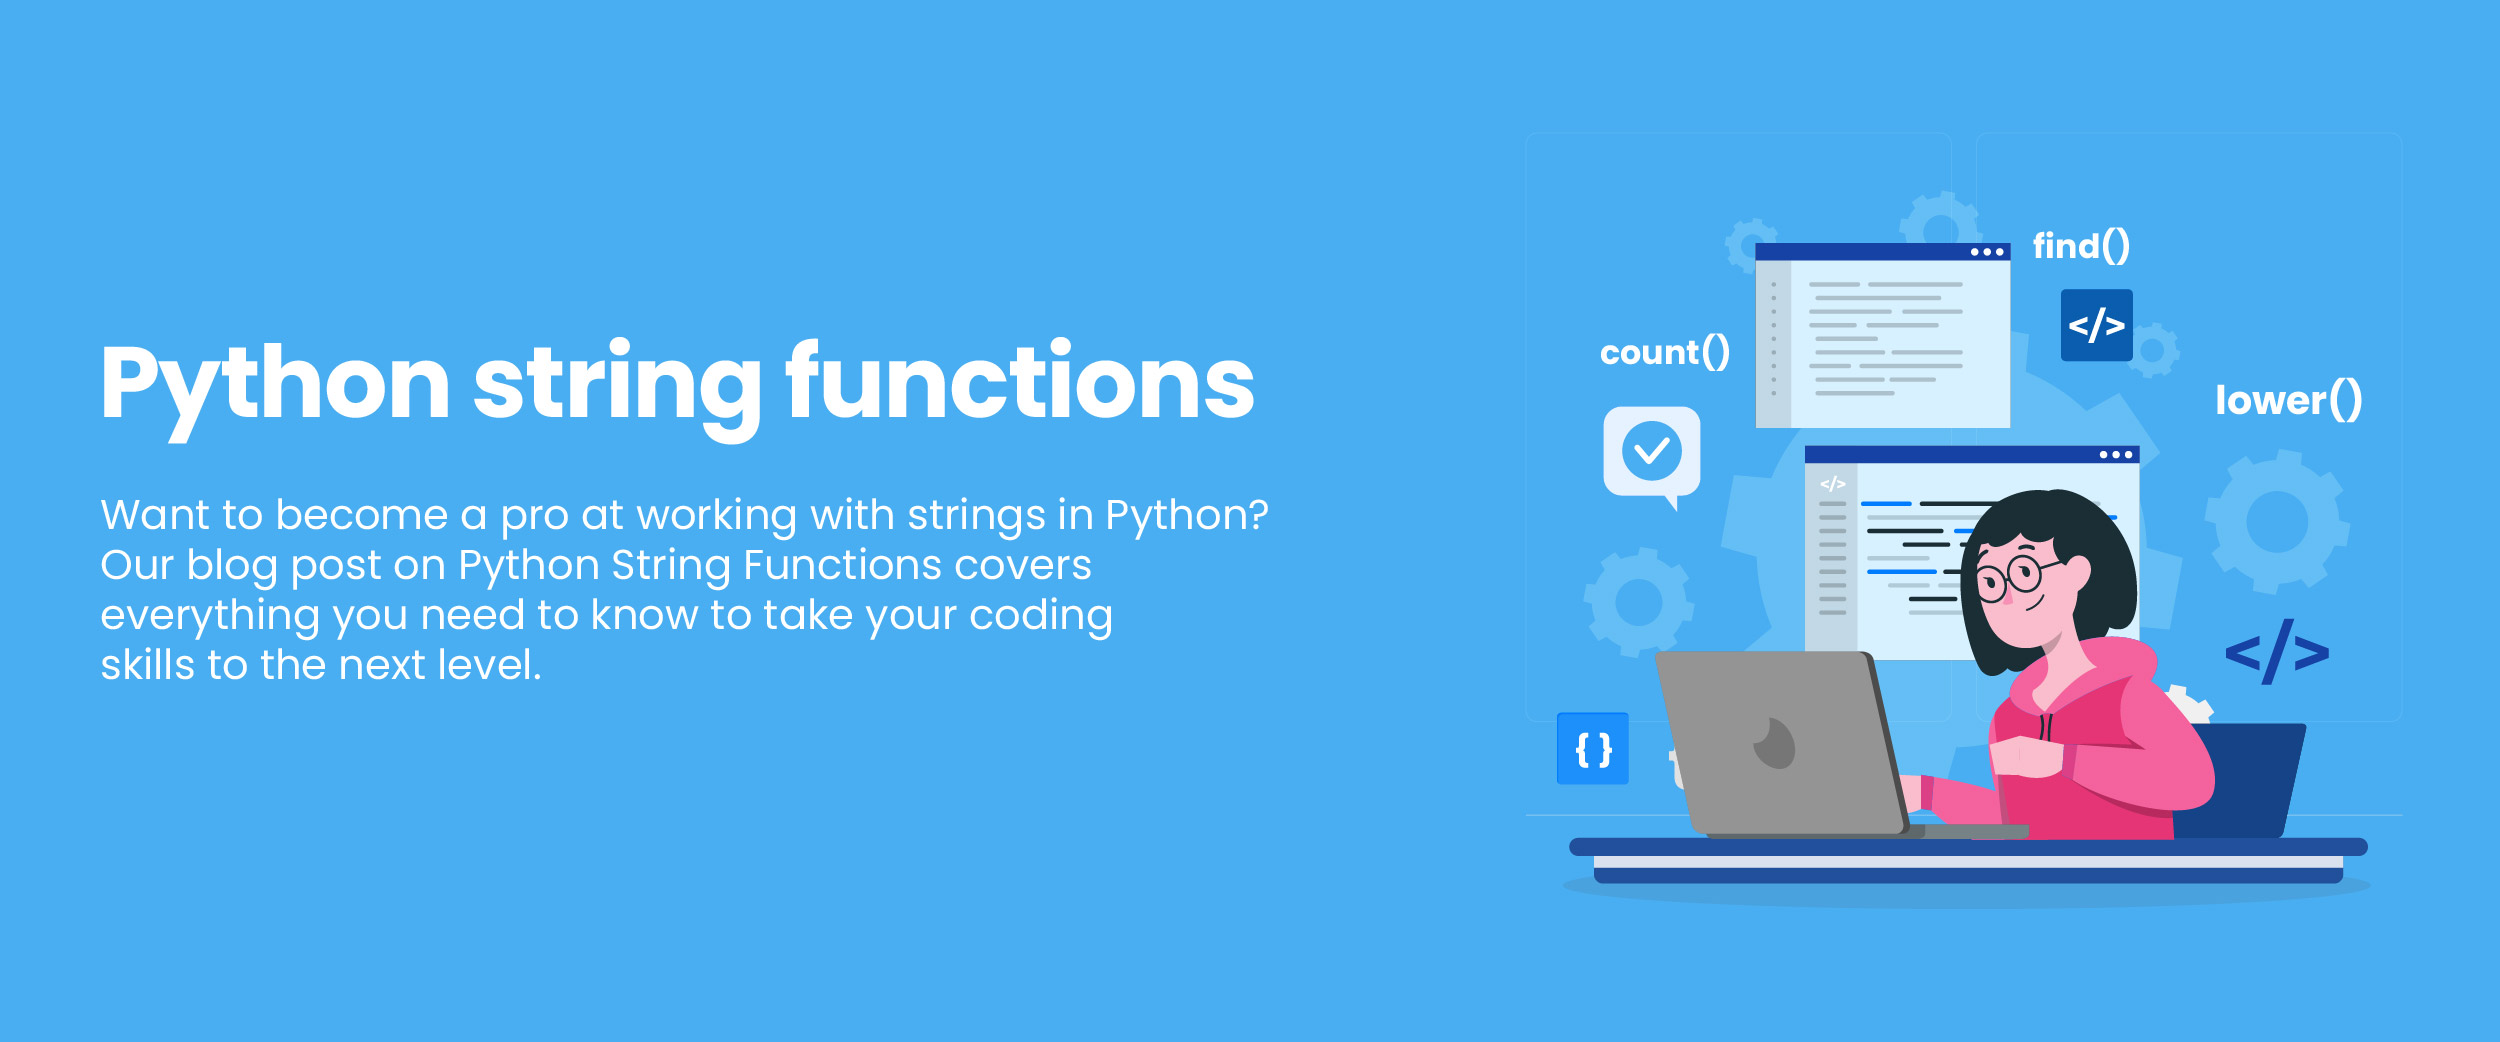 Python string functions